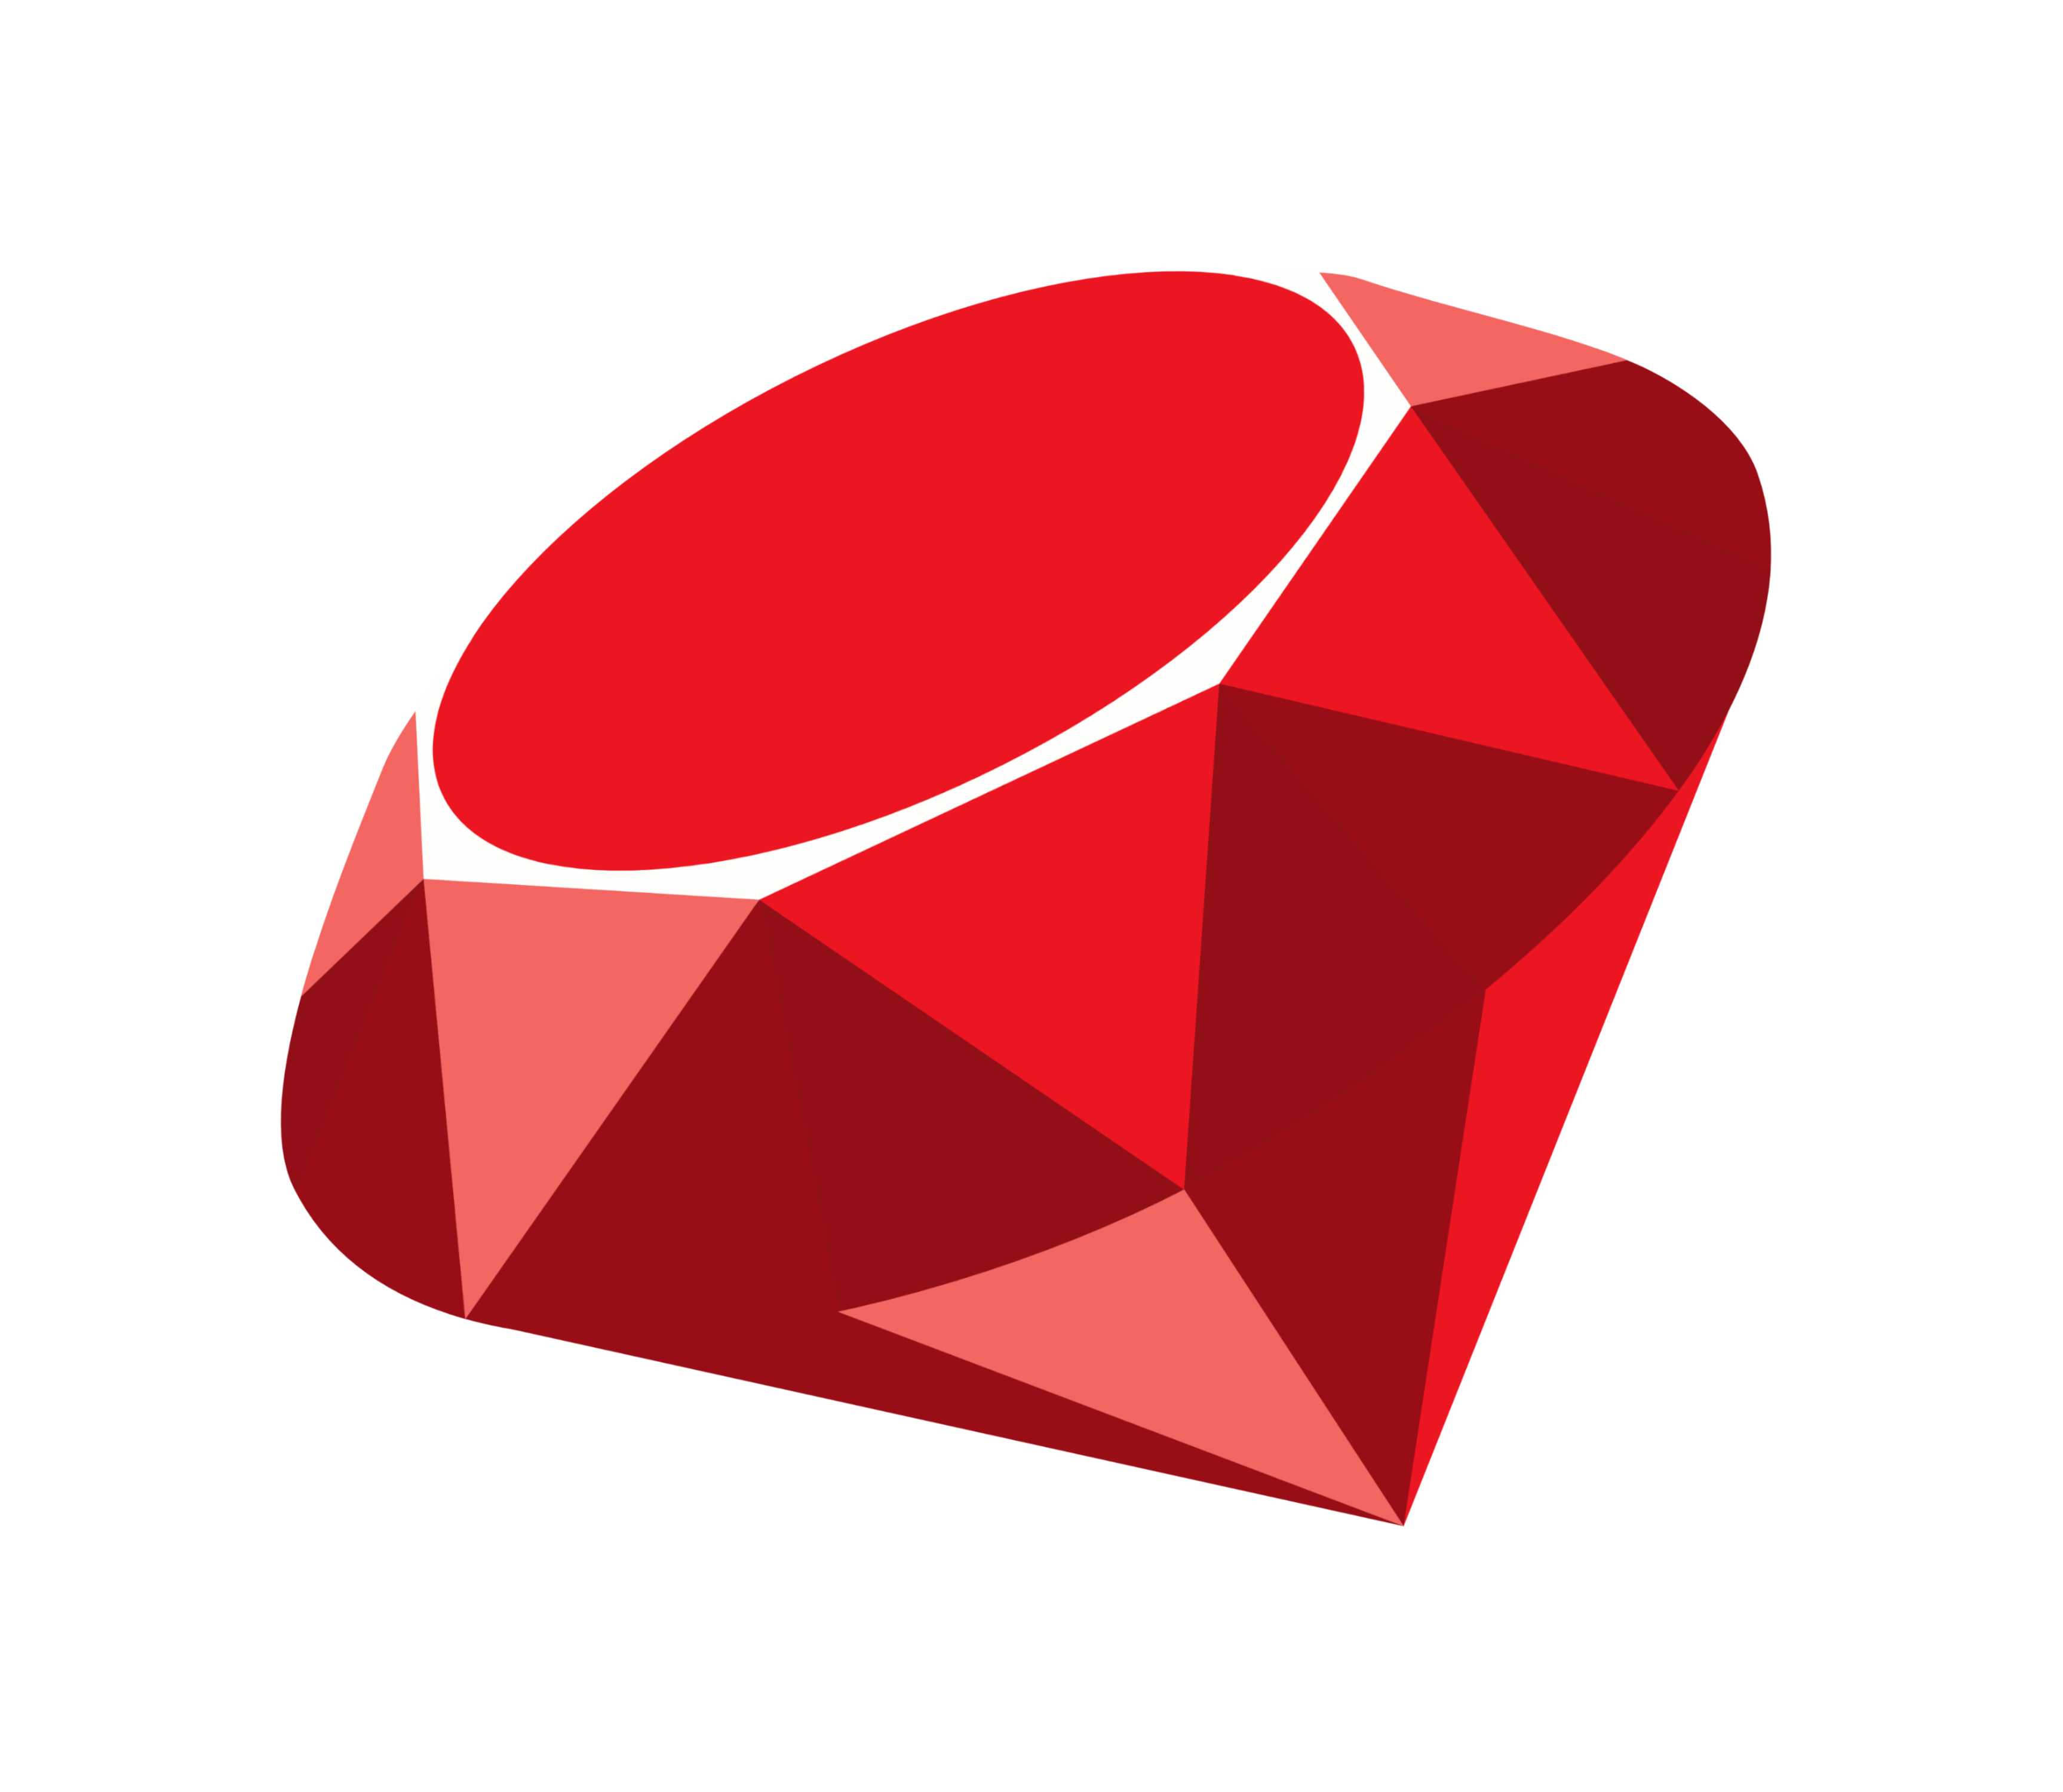 Ruby example code